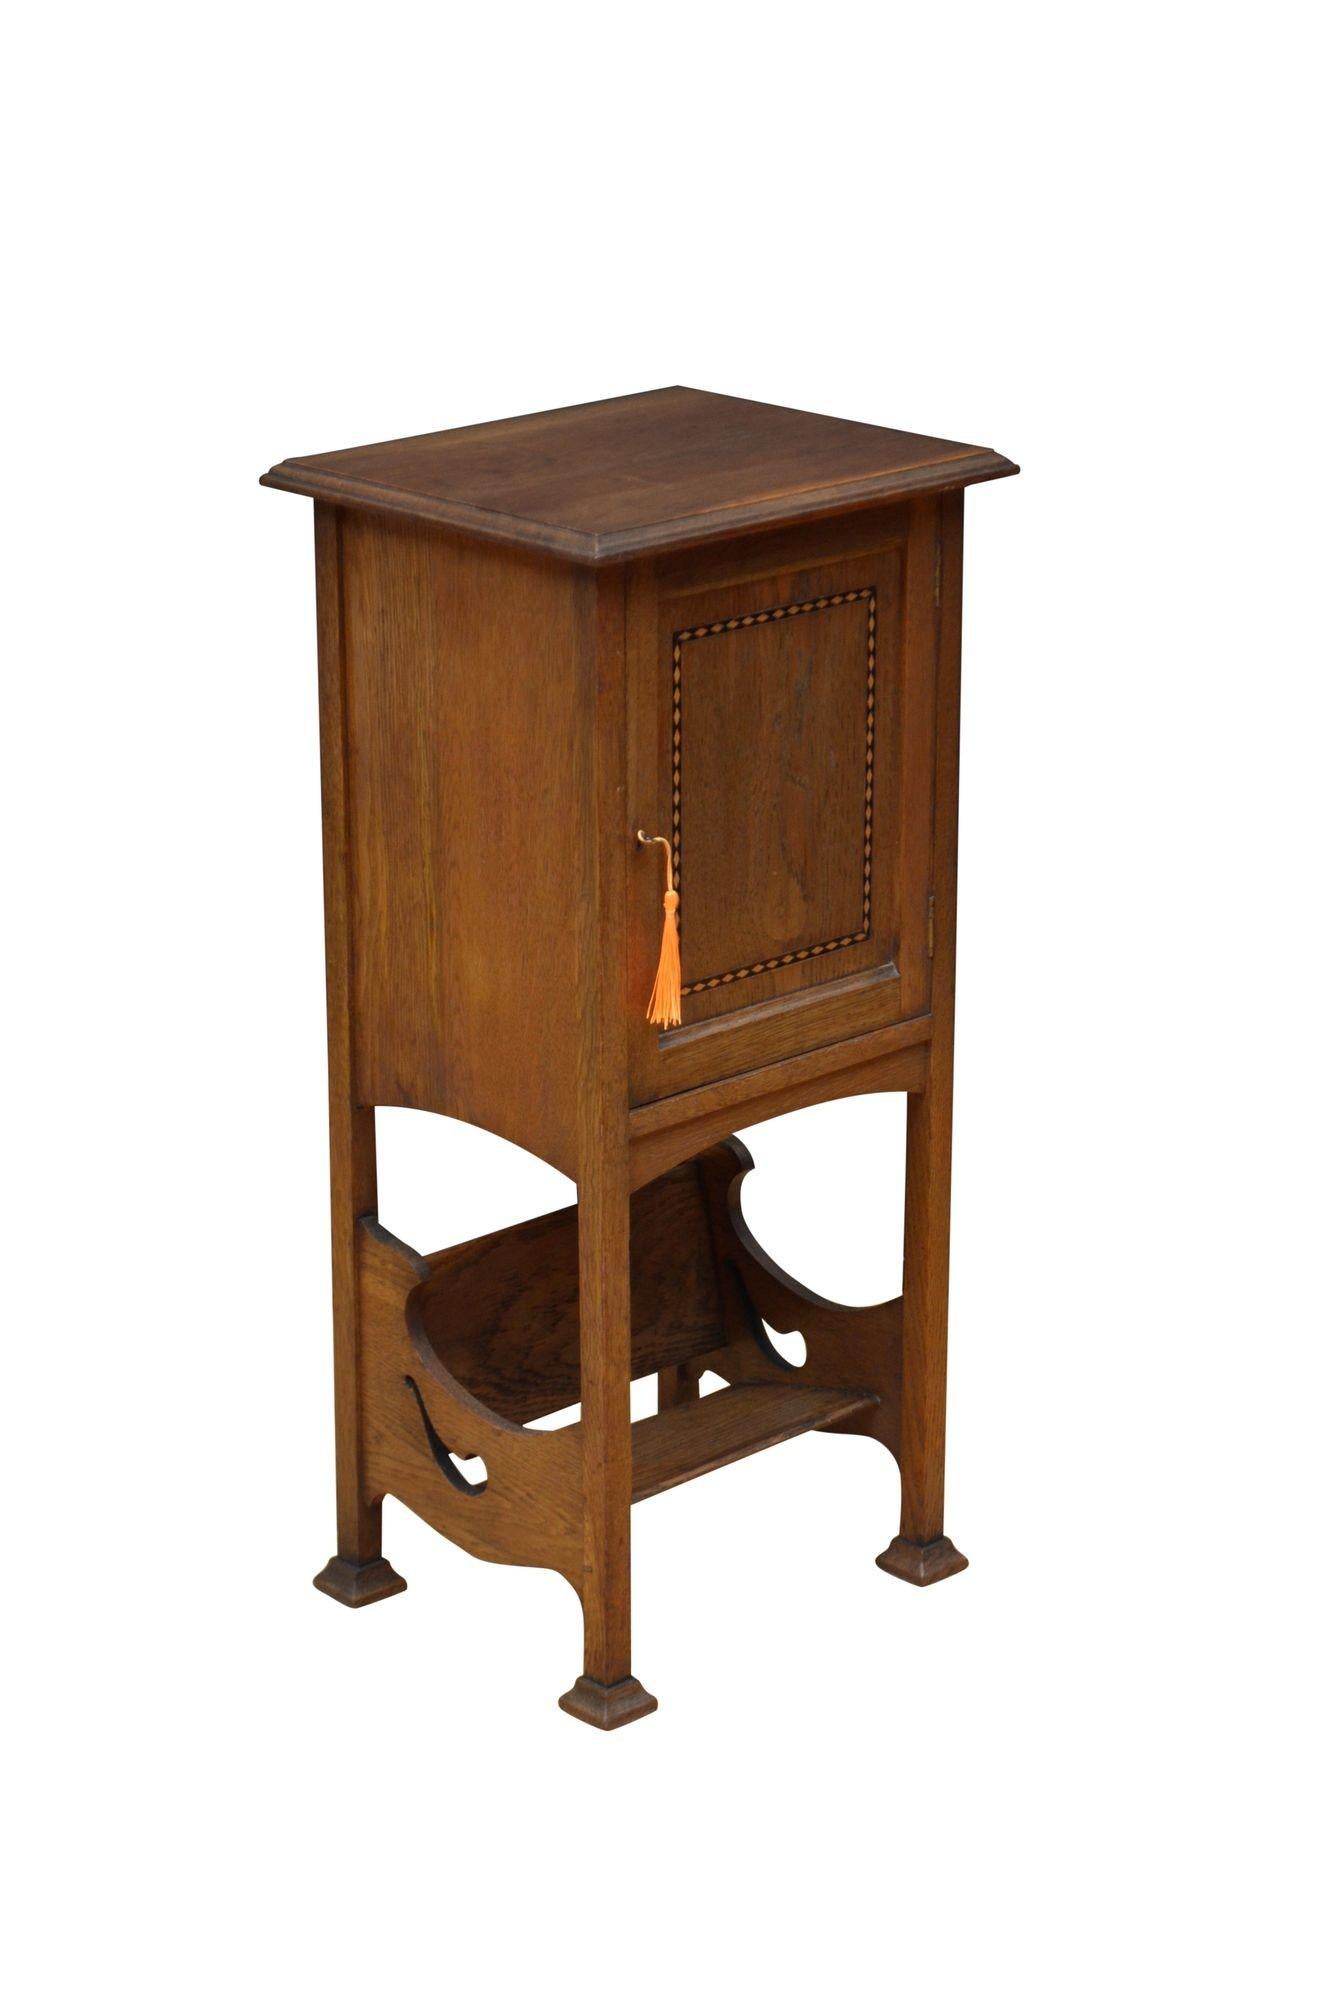 P0299 Stylish Arts and Crafts oak bedside cabinet, having single plank top with moulded edge above a panelled and inlaid cabinet door fitted with original working lock and a key and enclosing shaped shelf and pipe compartments on the doors (can be